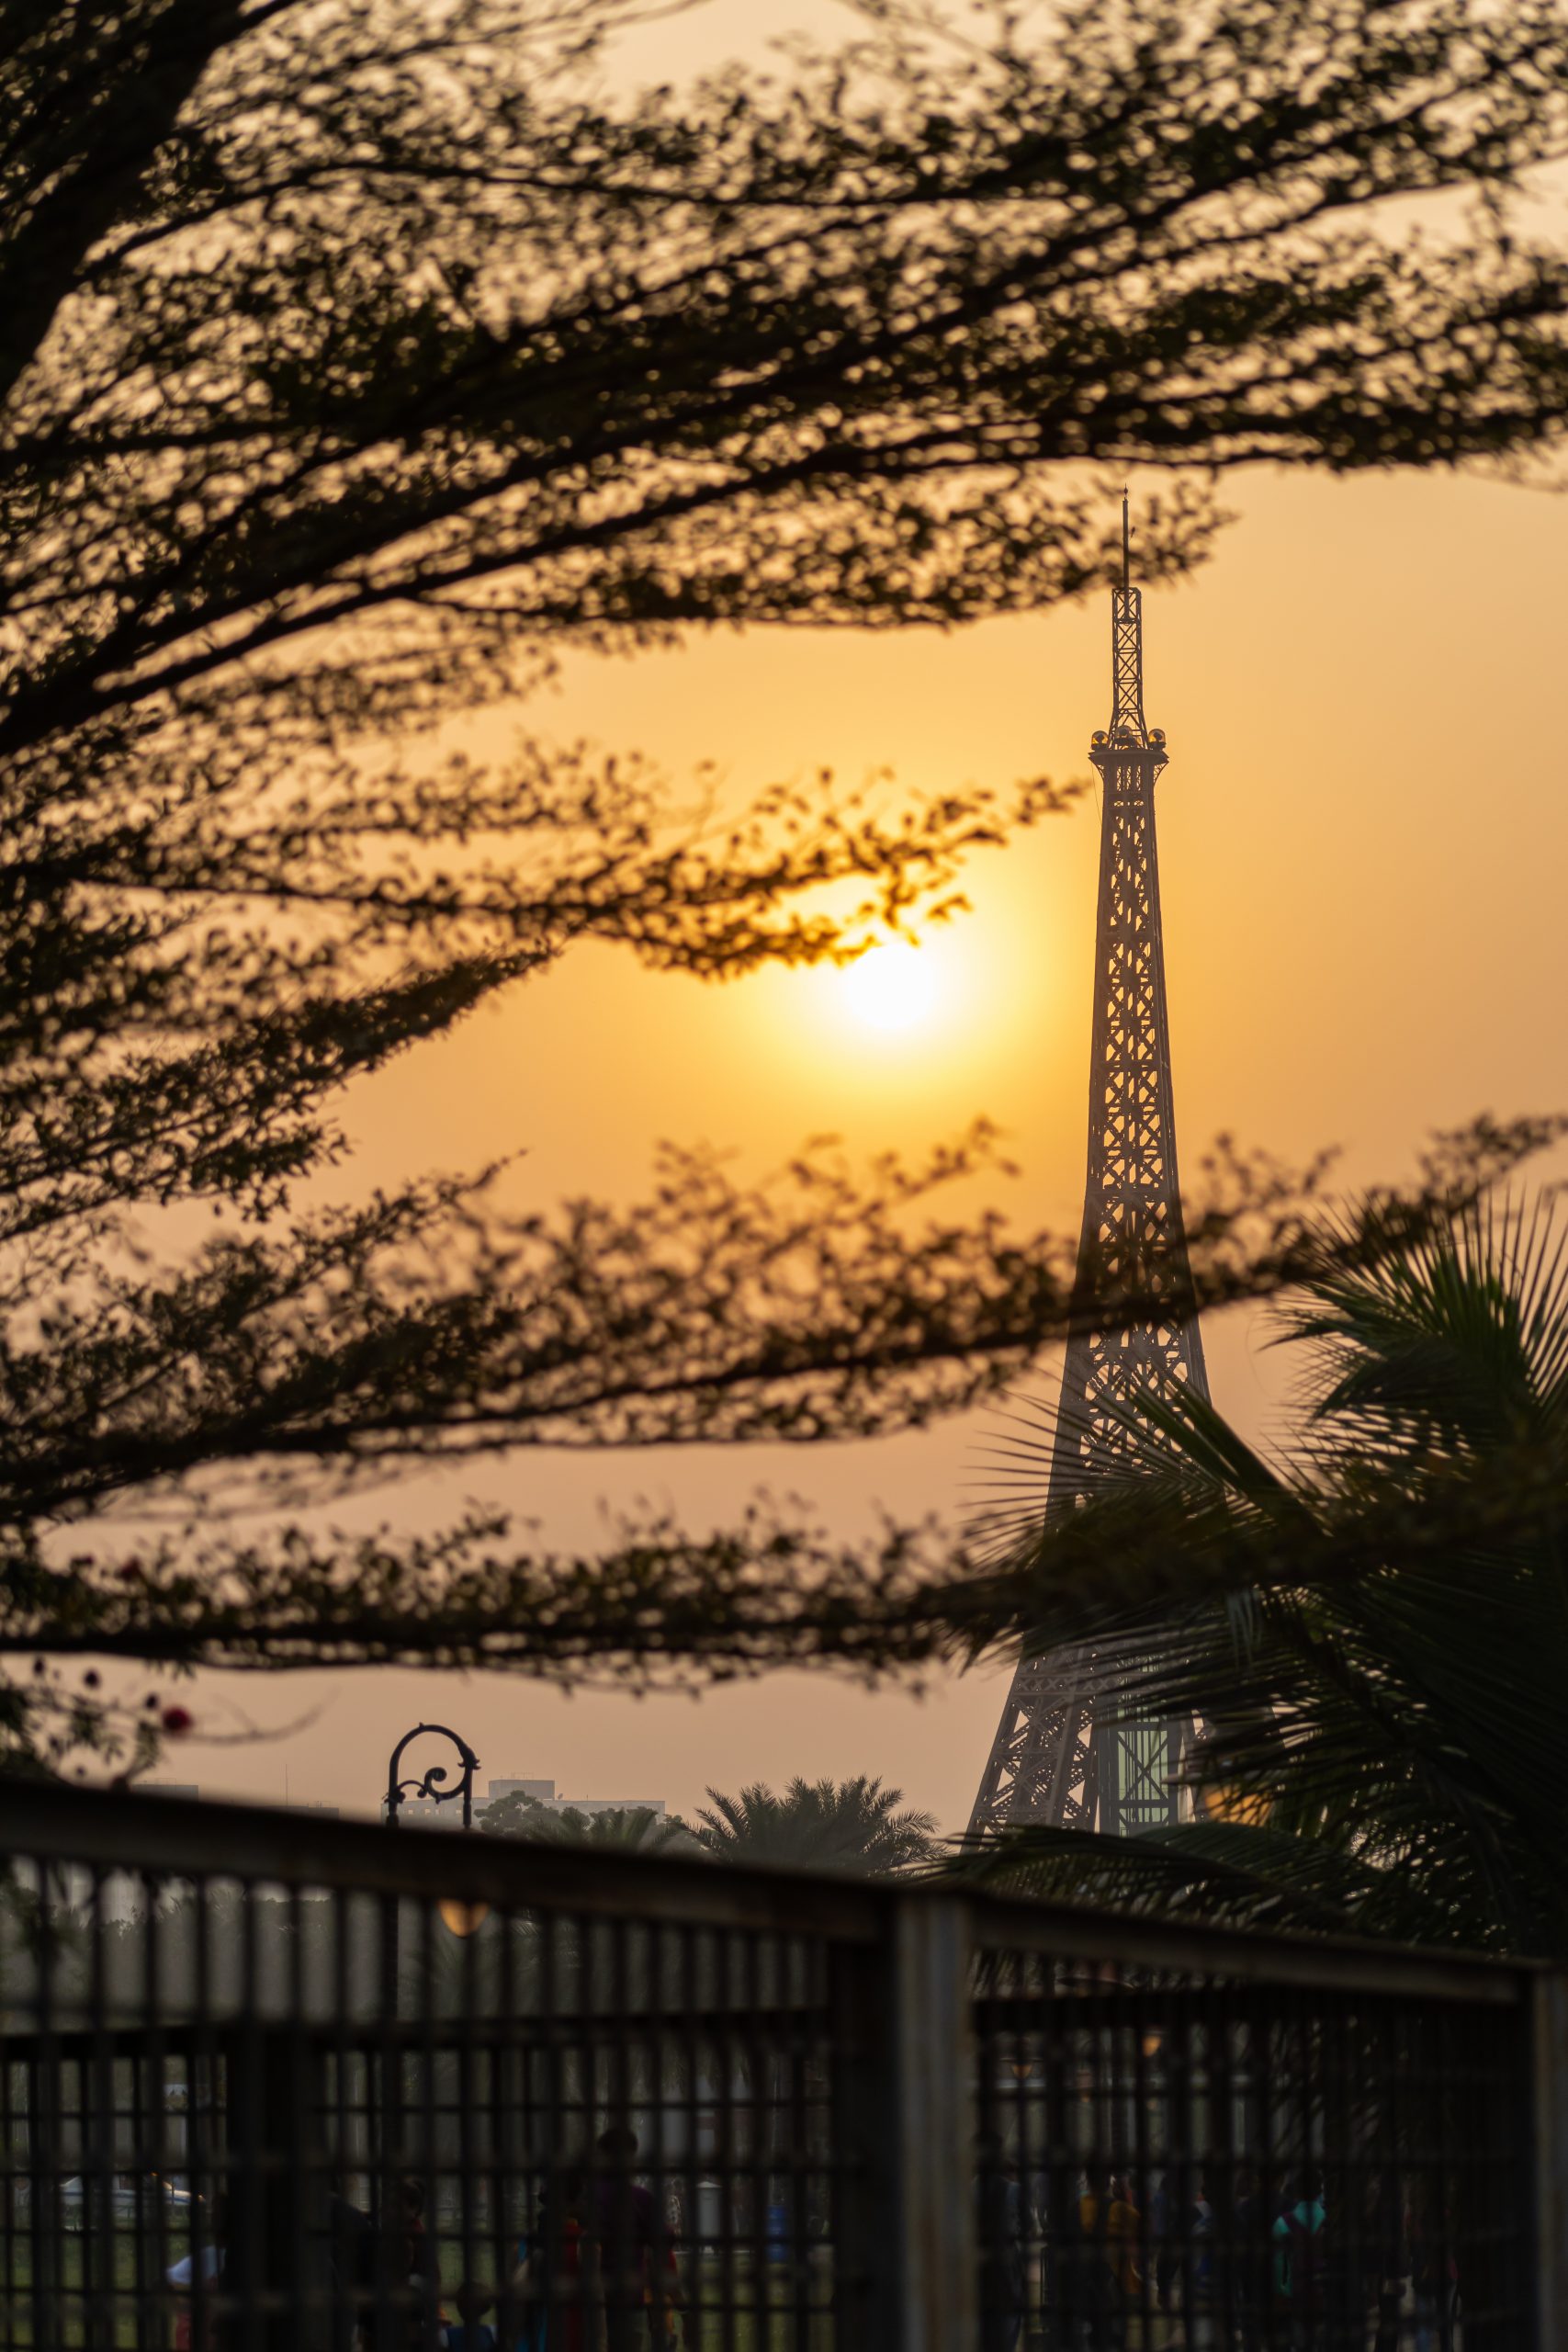 Sunset behind the model of Eiffel Tower